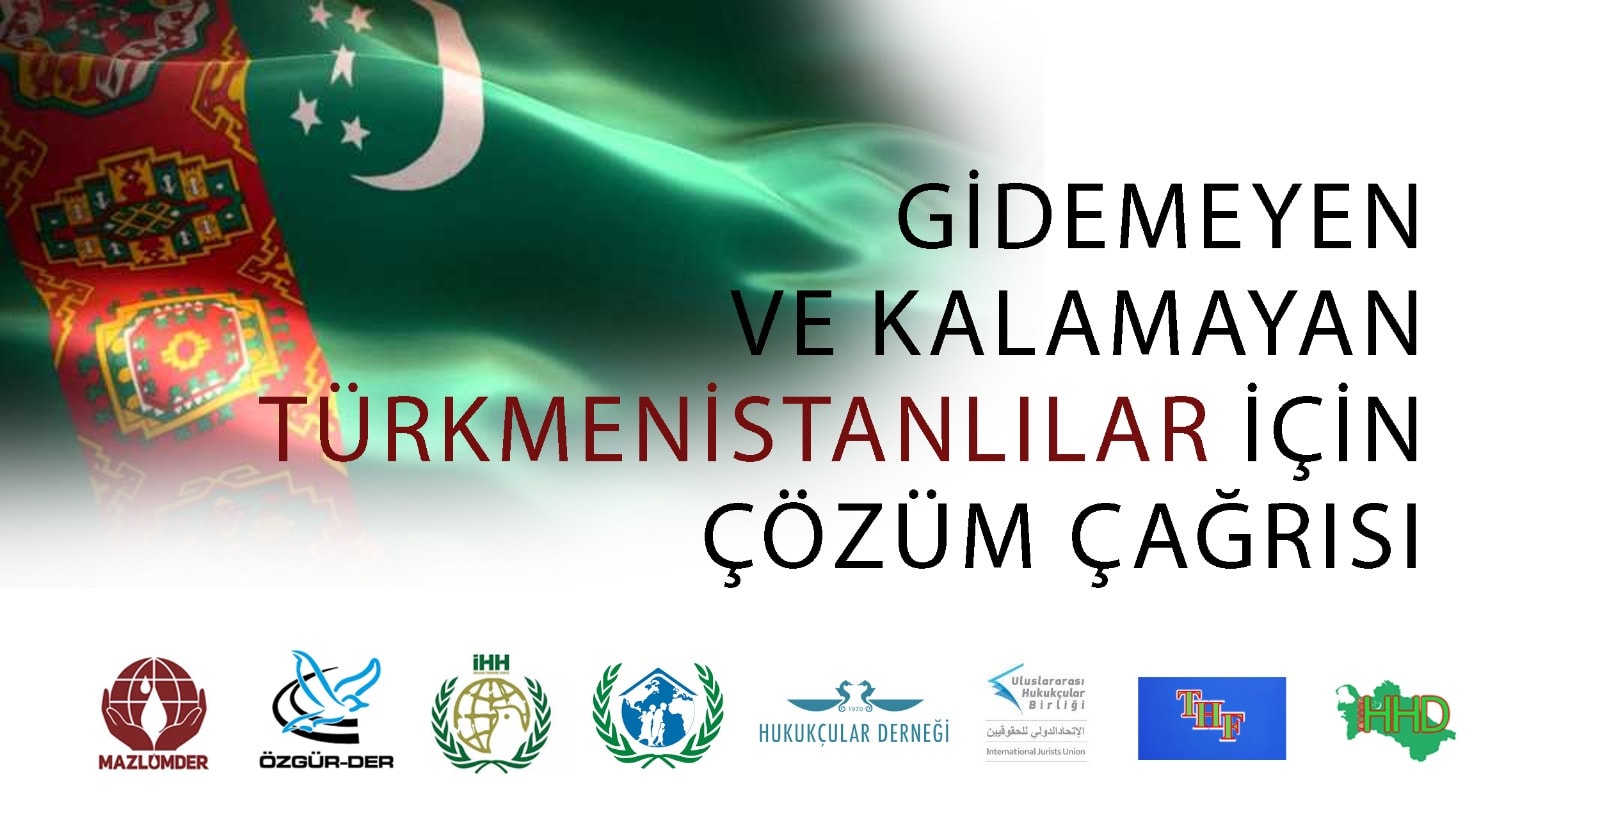 A SOLUTIONS CALL FOR TURKMENISTANS WHO CANNOT GO  AND CAN'T STAY